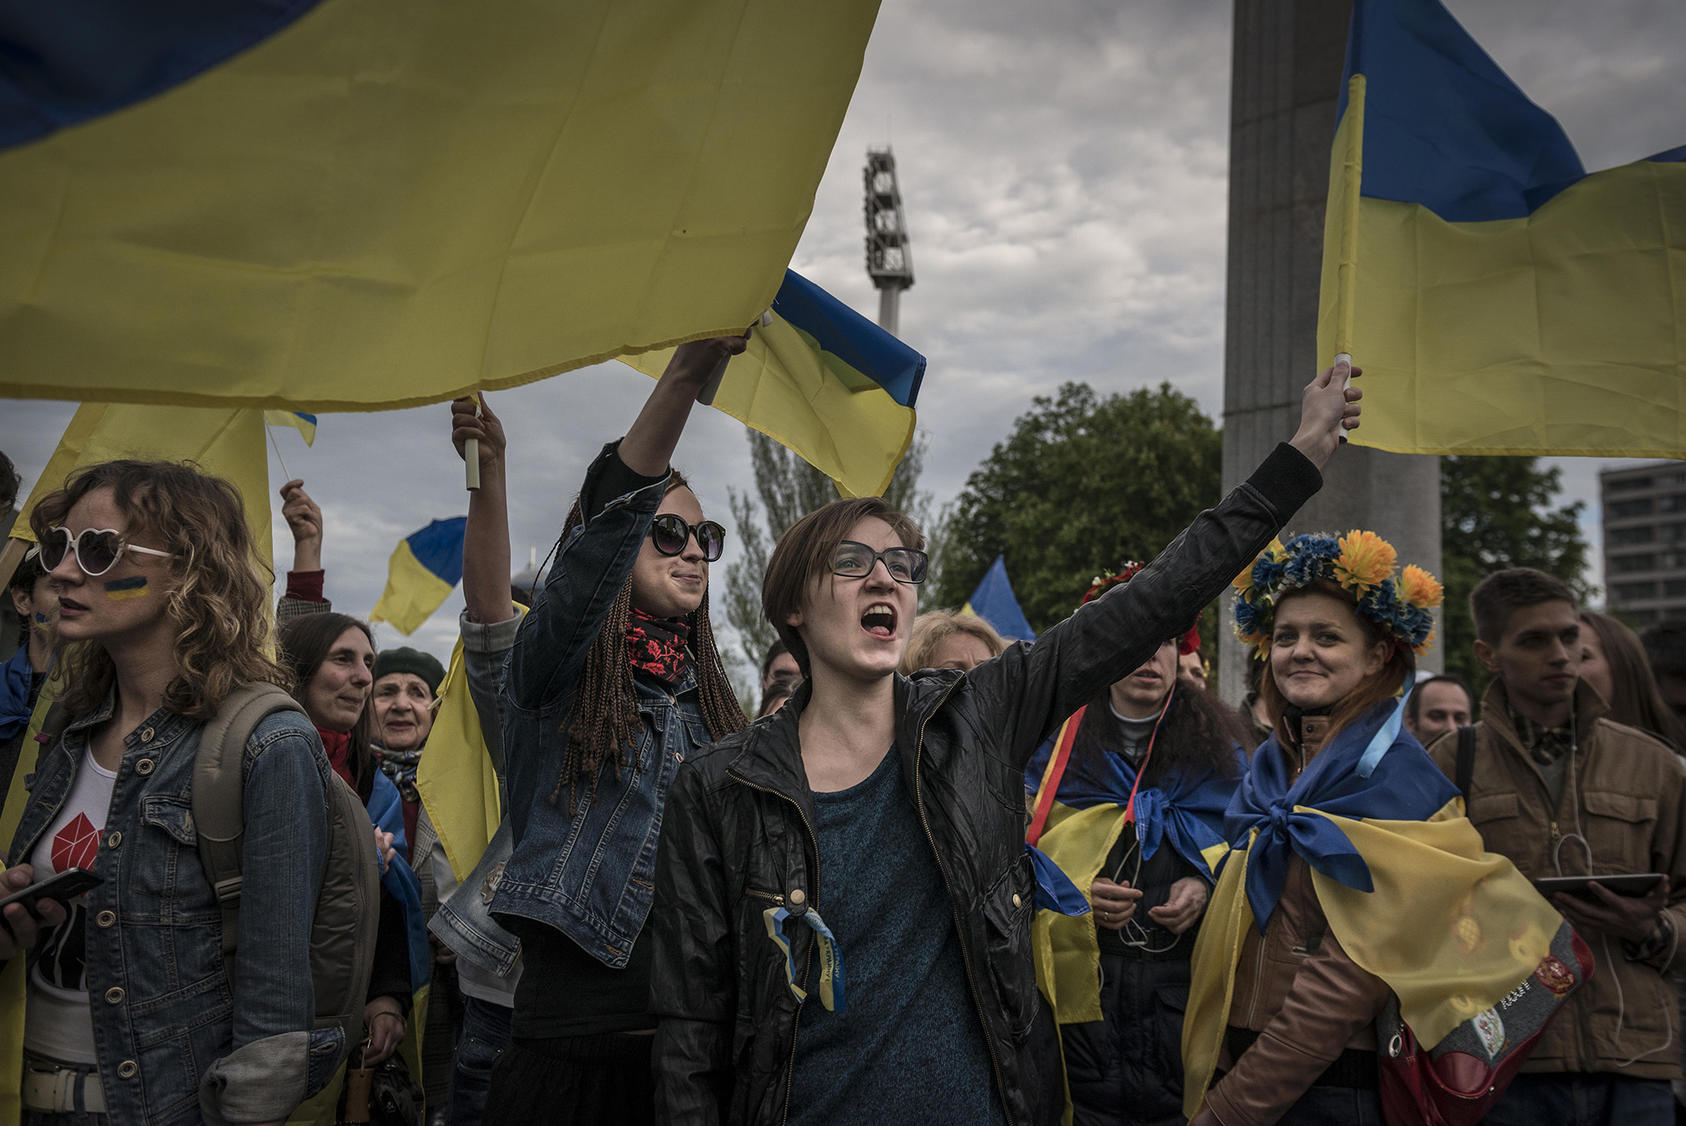 Waving their country's flag, pro-Ukrainians rally for a march in Donetsk, Ukraine, April 28, 2014. (Sergey Ponomarev/The New York Times)